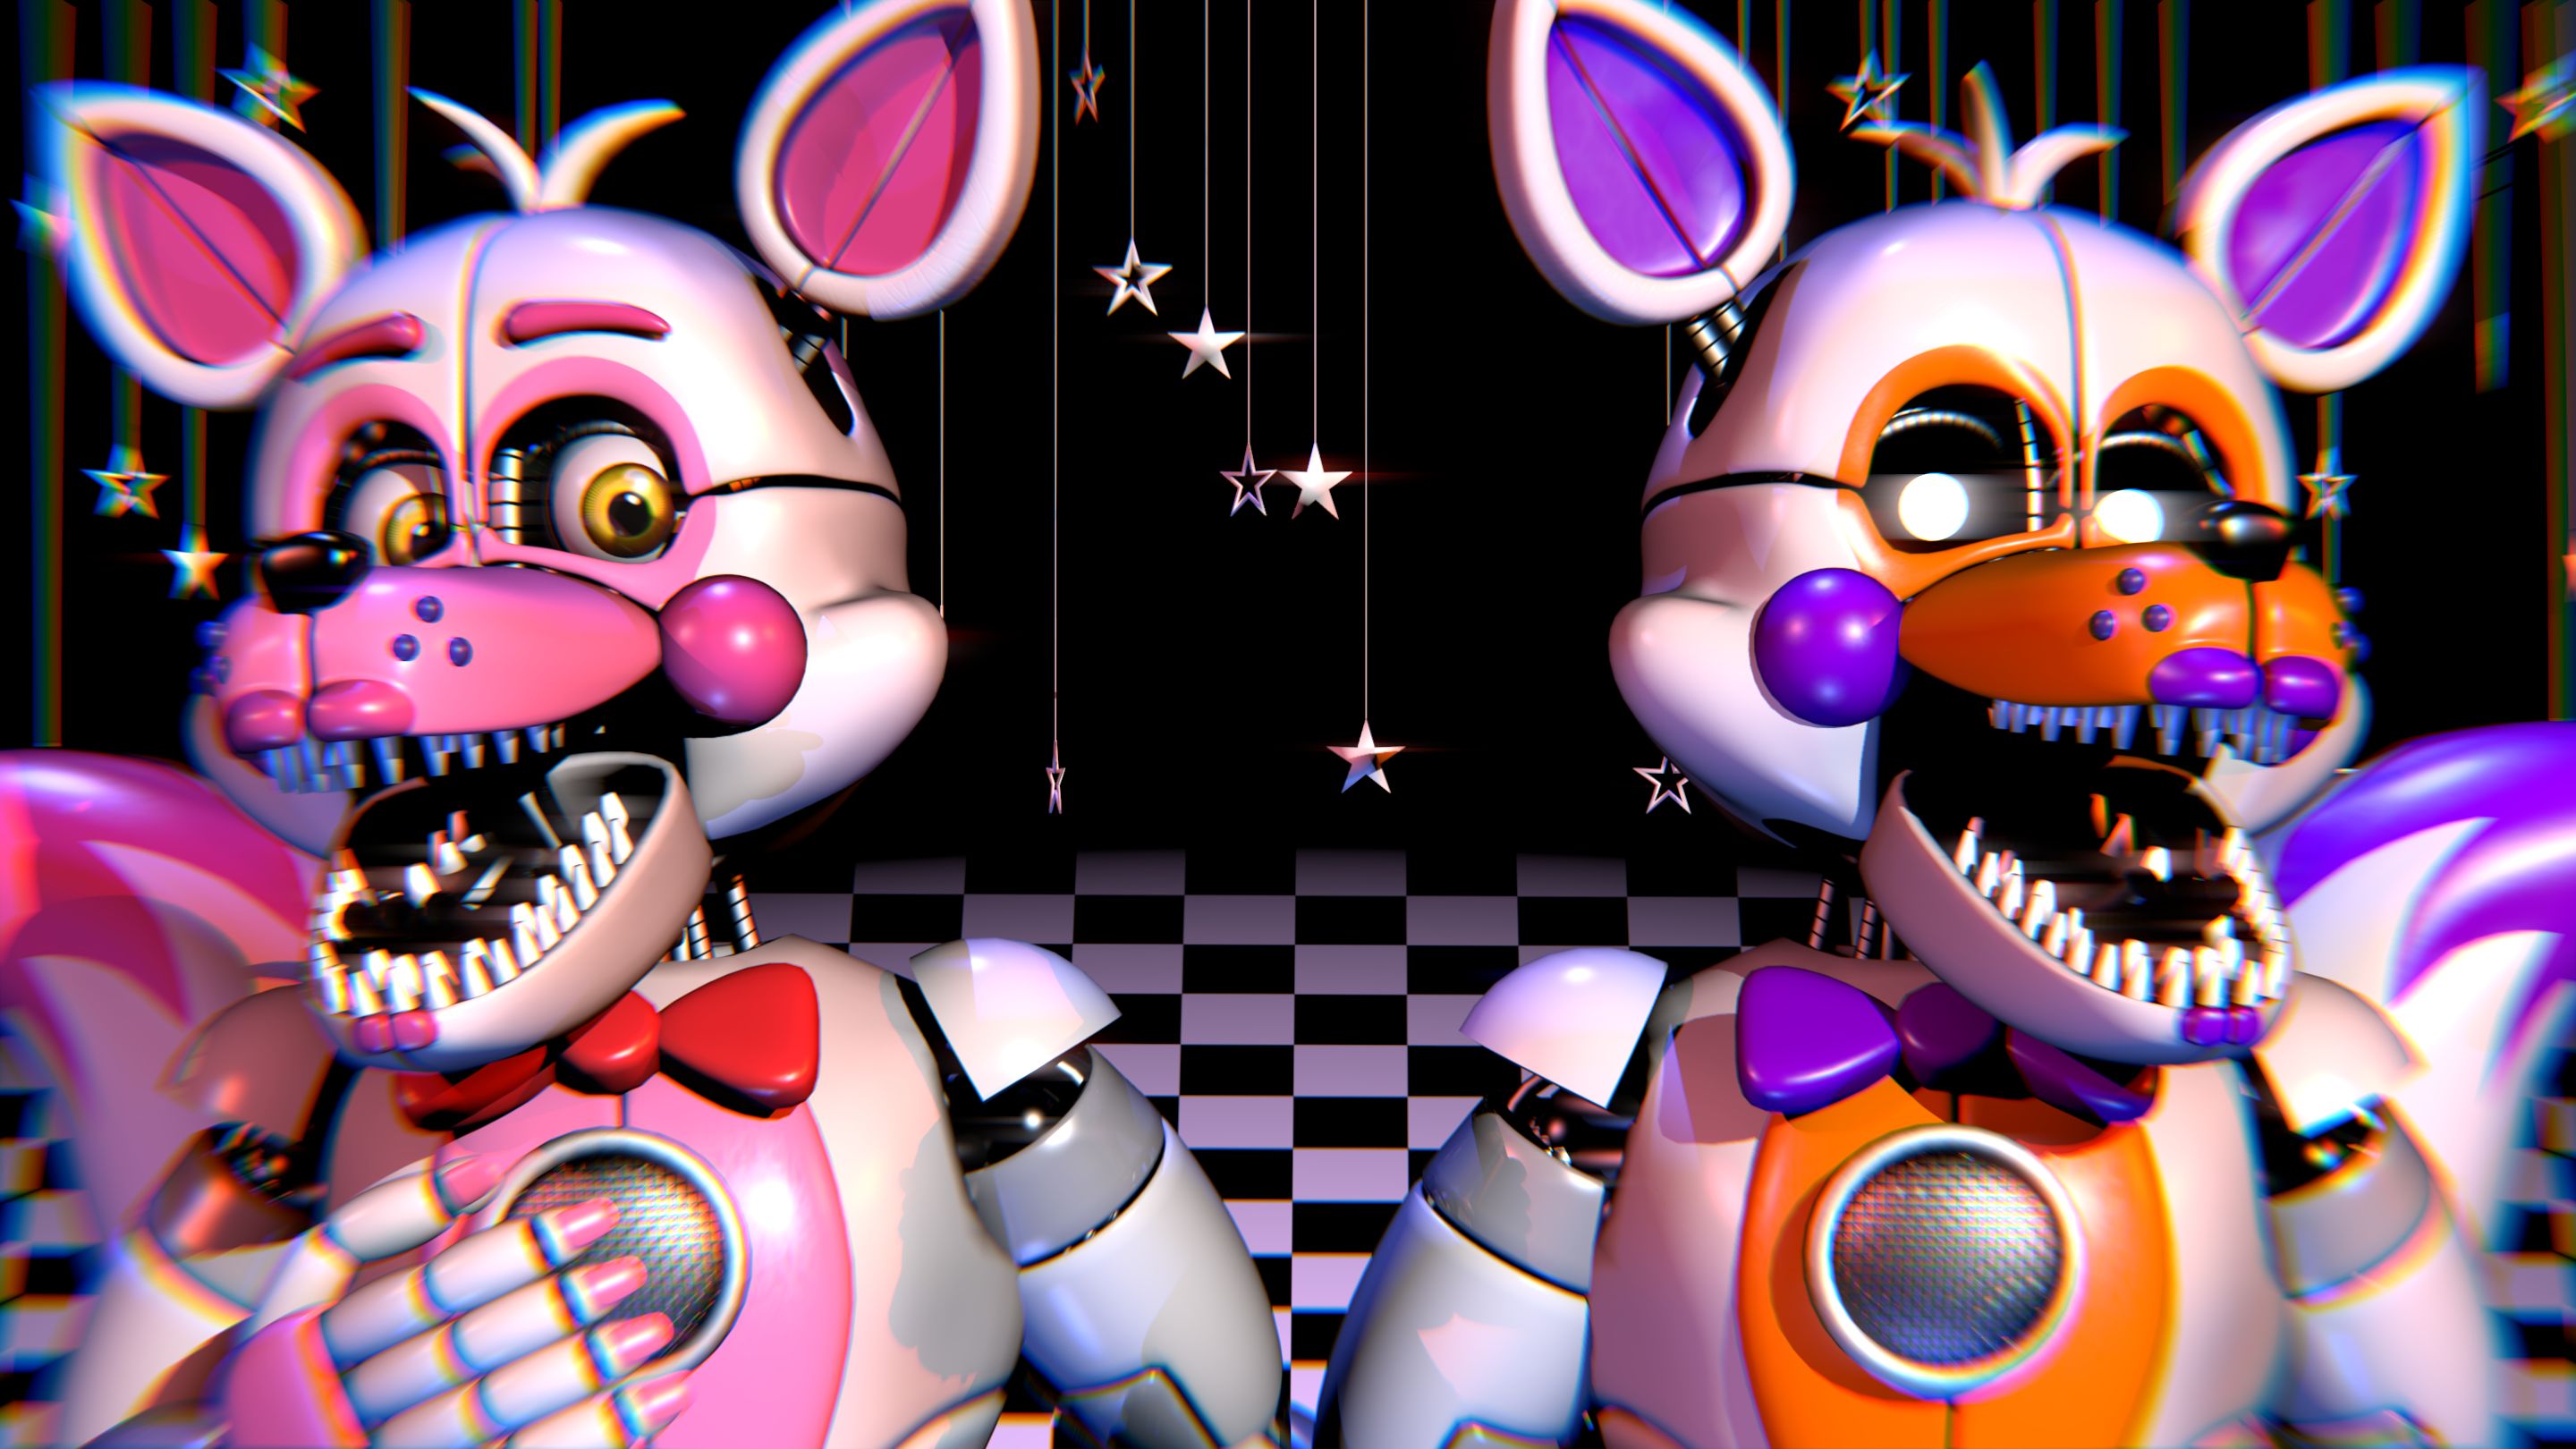 100+] Five Nights At Freddys Sister Location Wallpapers